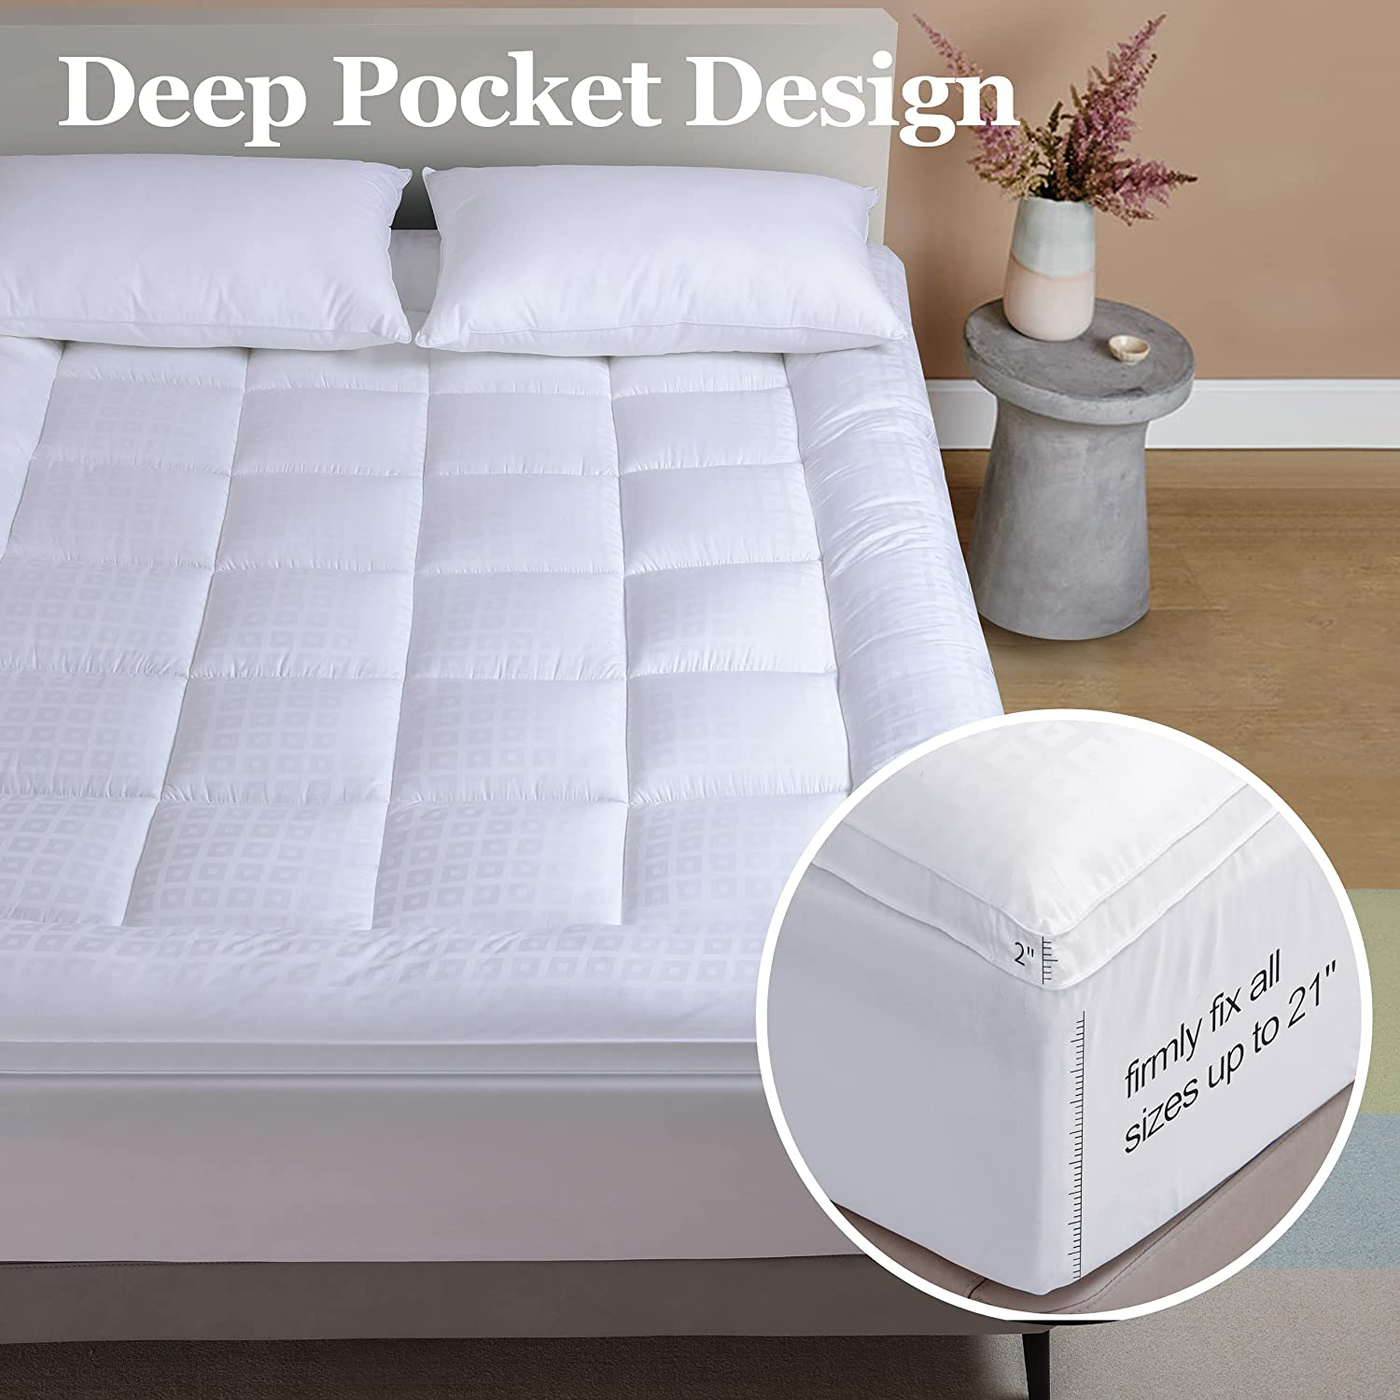 Thick Mattress Pad Cover Full Size Cooling Mattress Topper Pillow Top Cotton Upper Layer with Polyester Fill Quilted Fitted Mattress Protector 8"-21" Deep Pocket